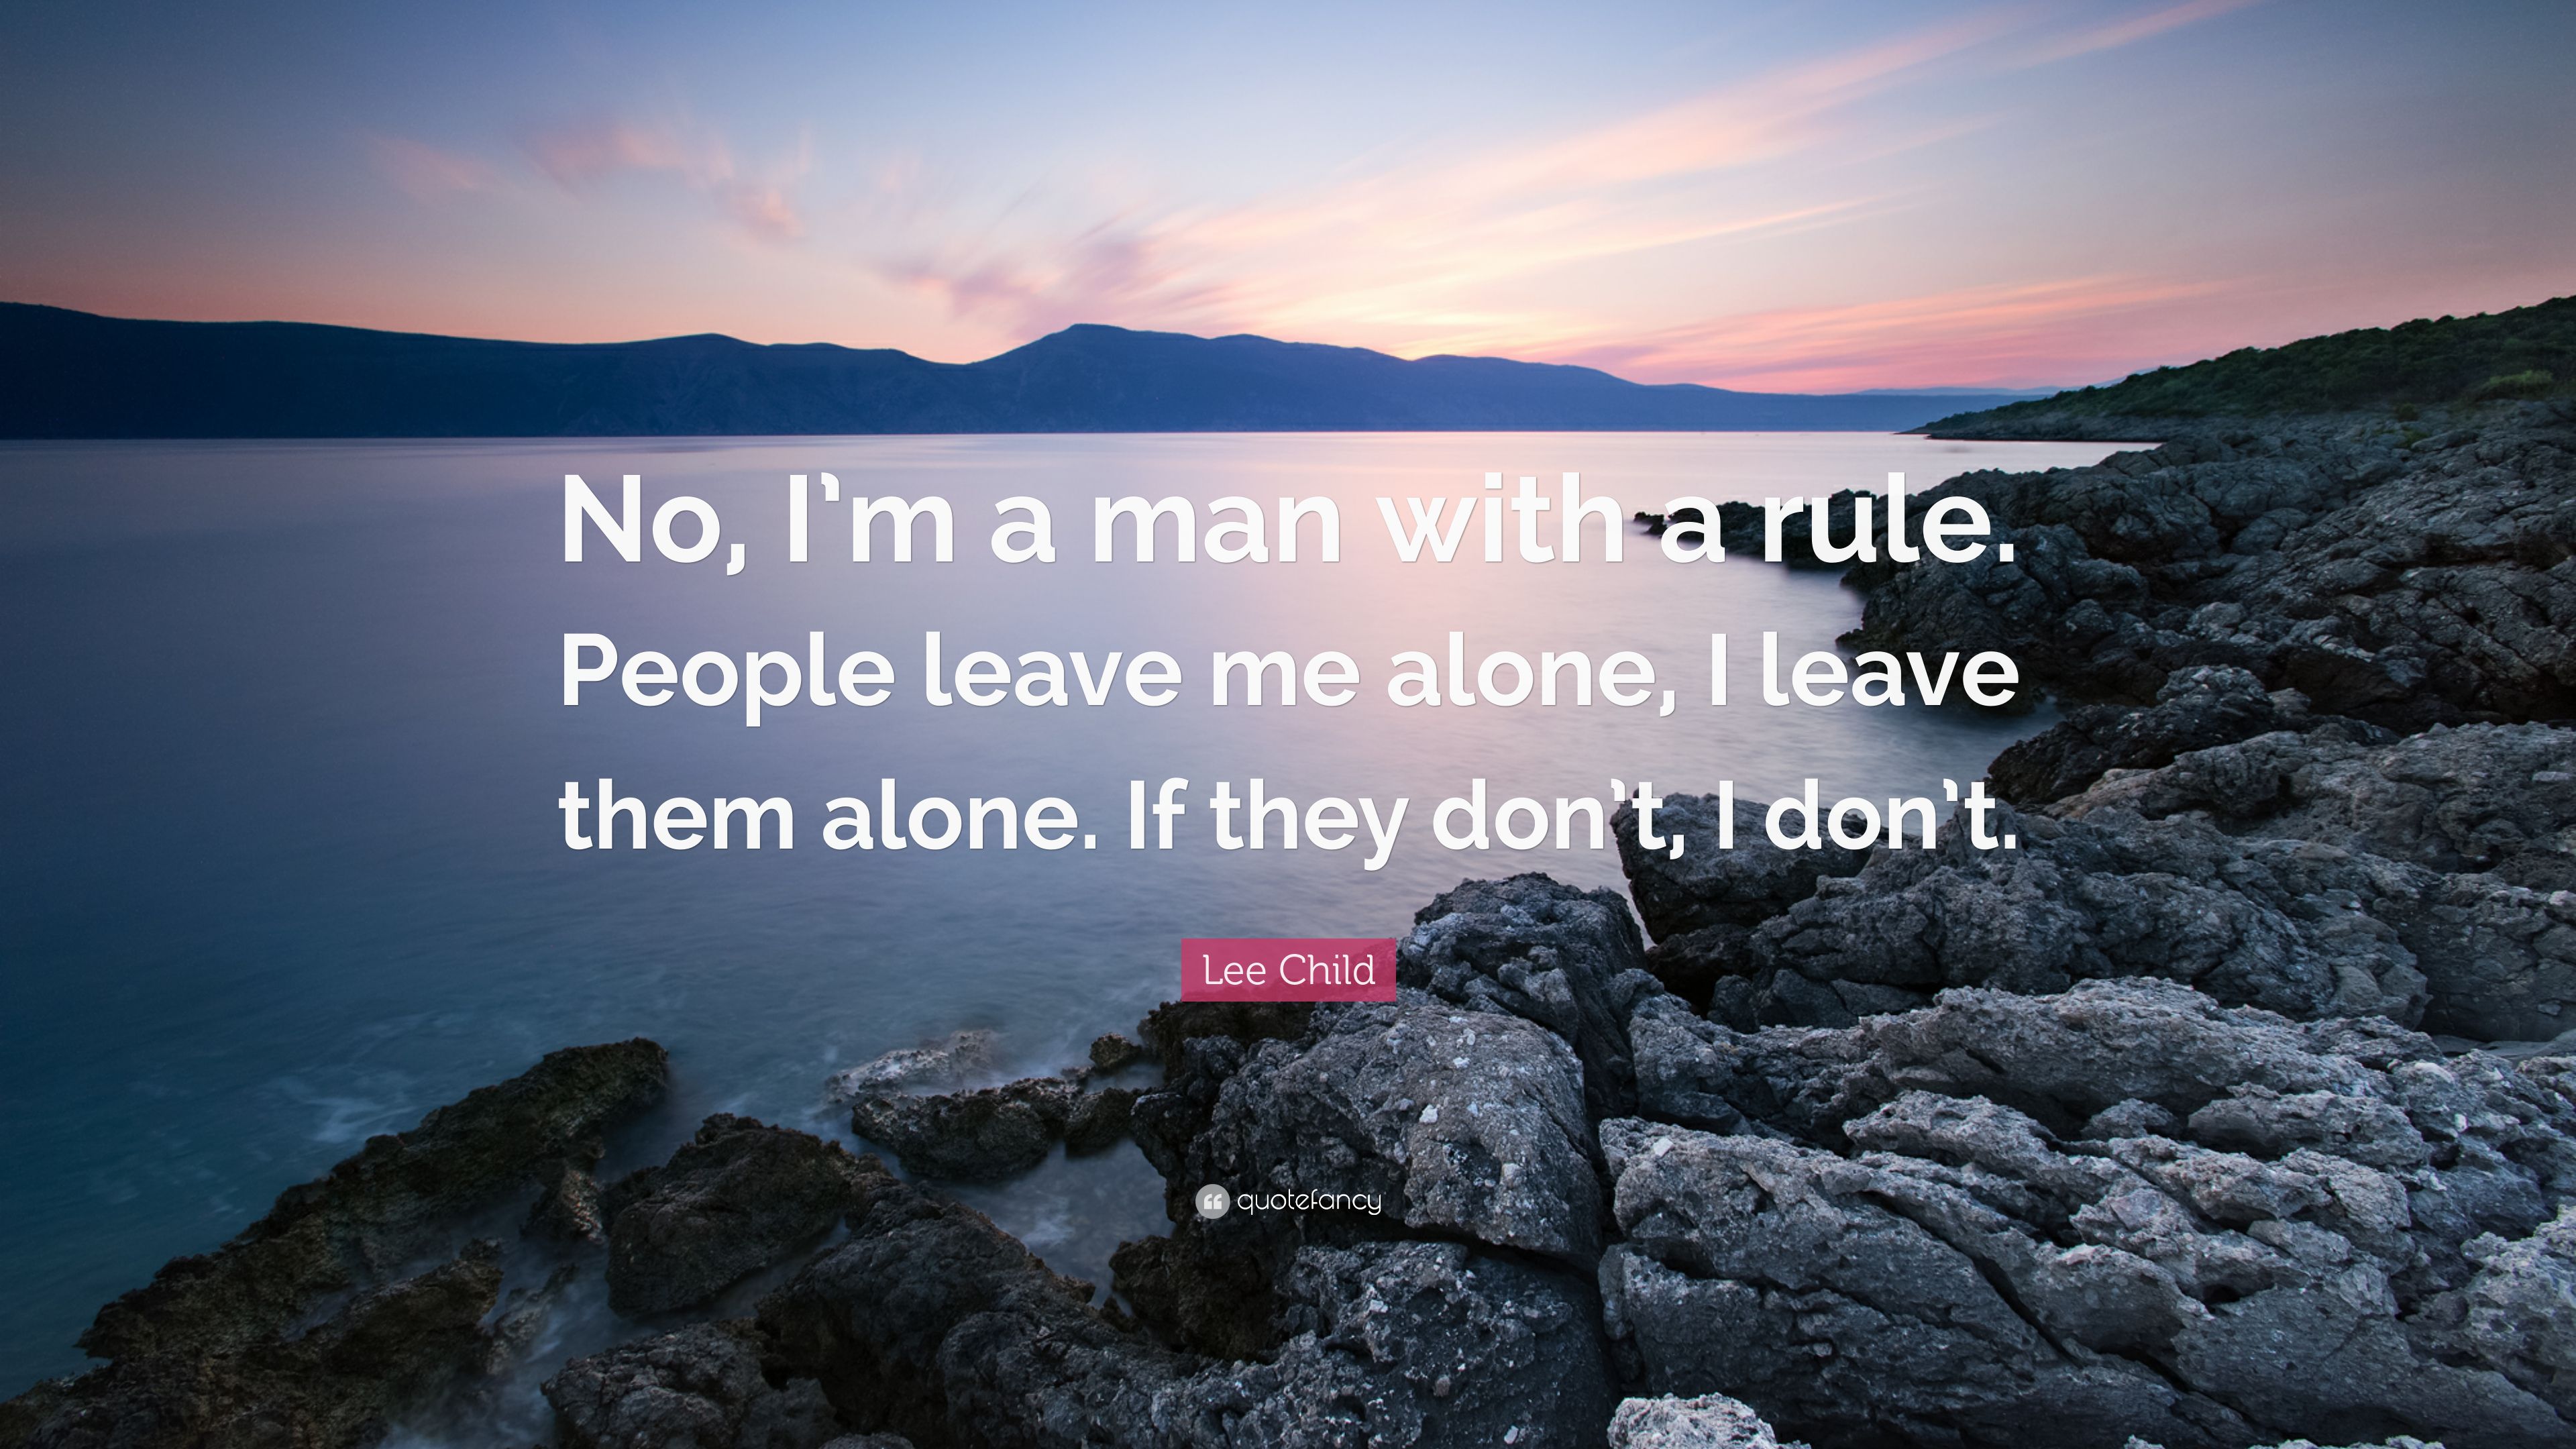 Lee Child Quote: “No, I'm a man with a rule. People leave me alone